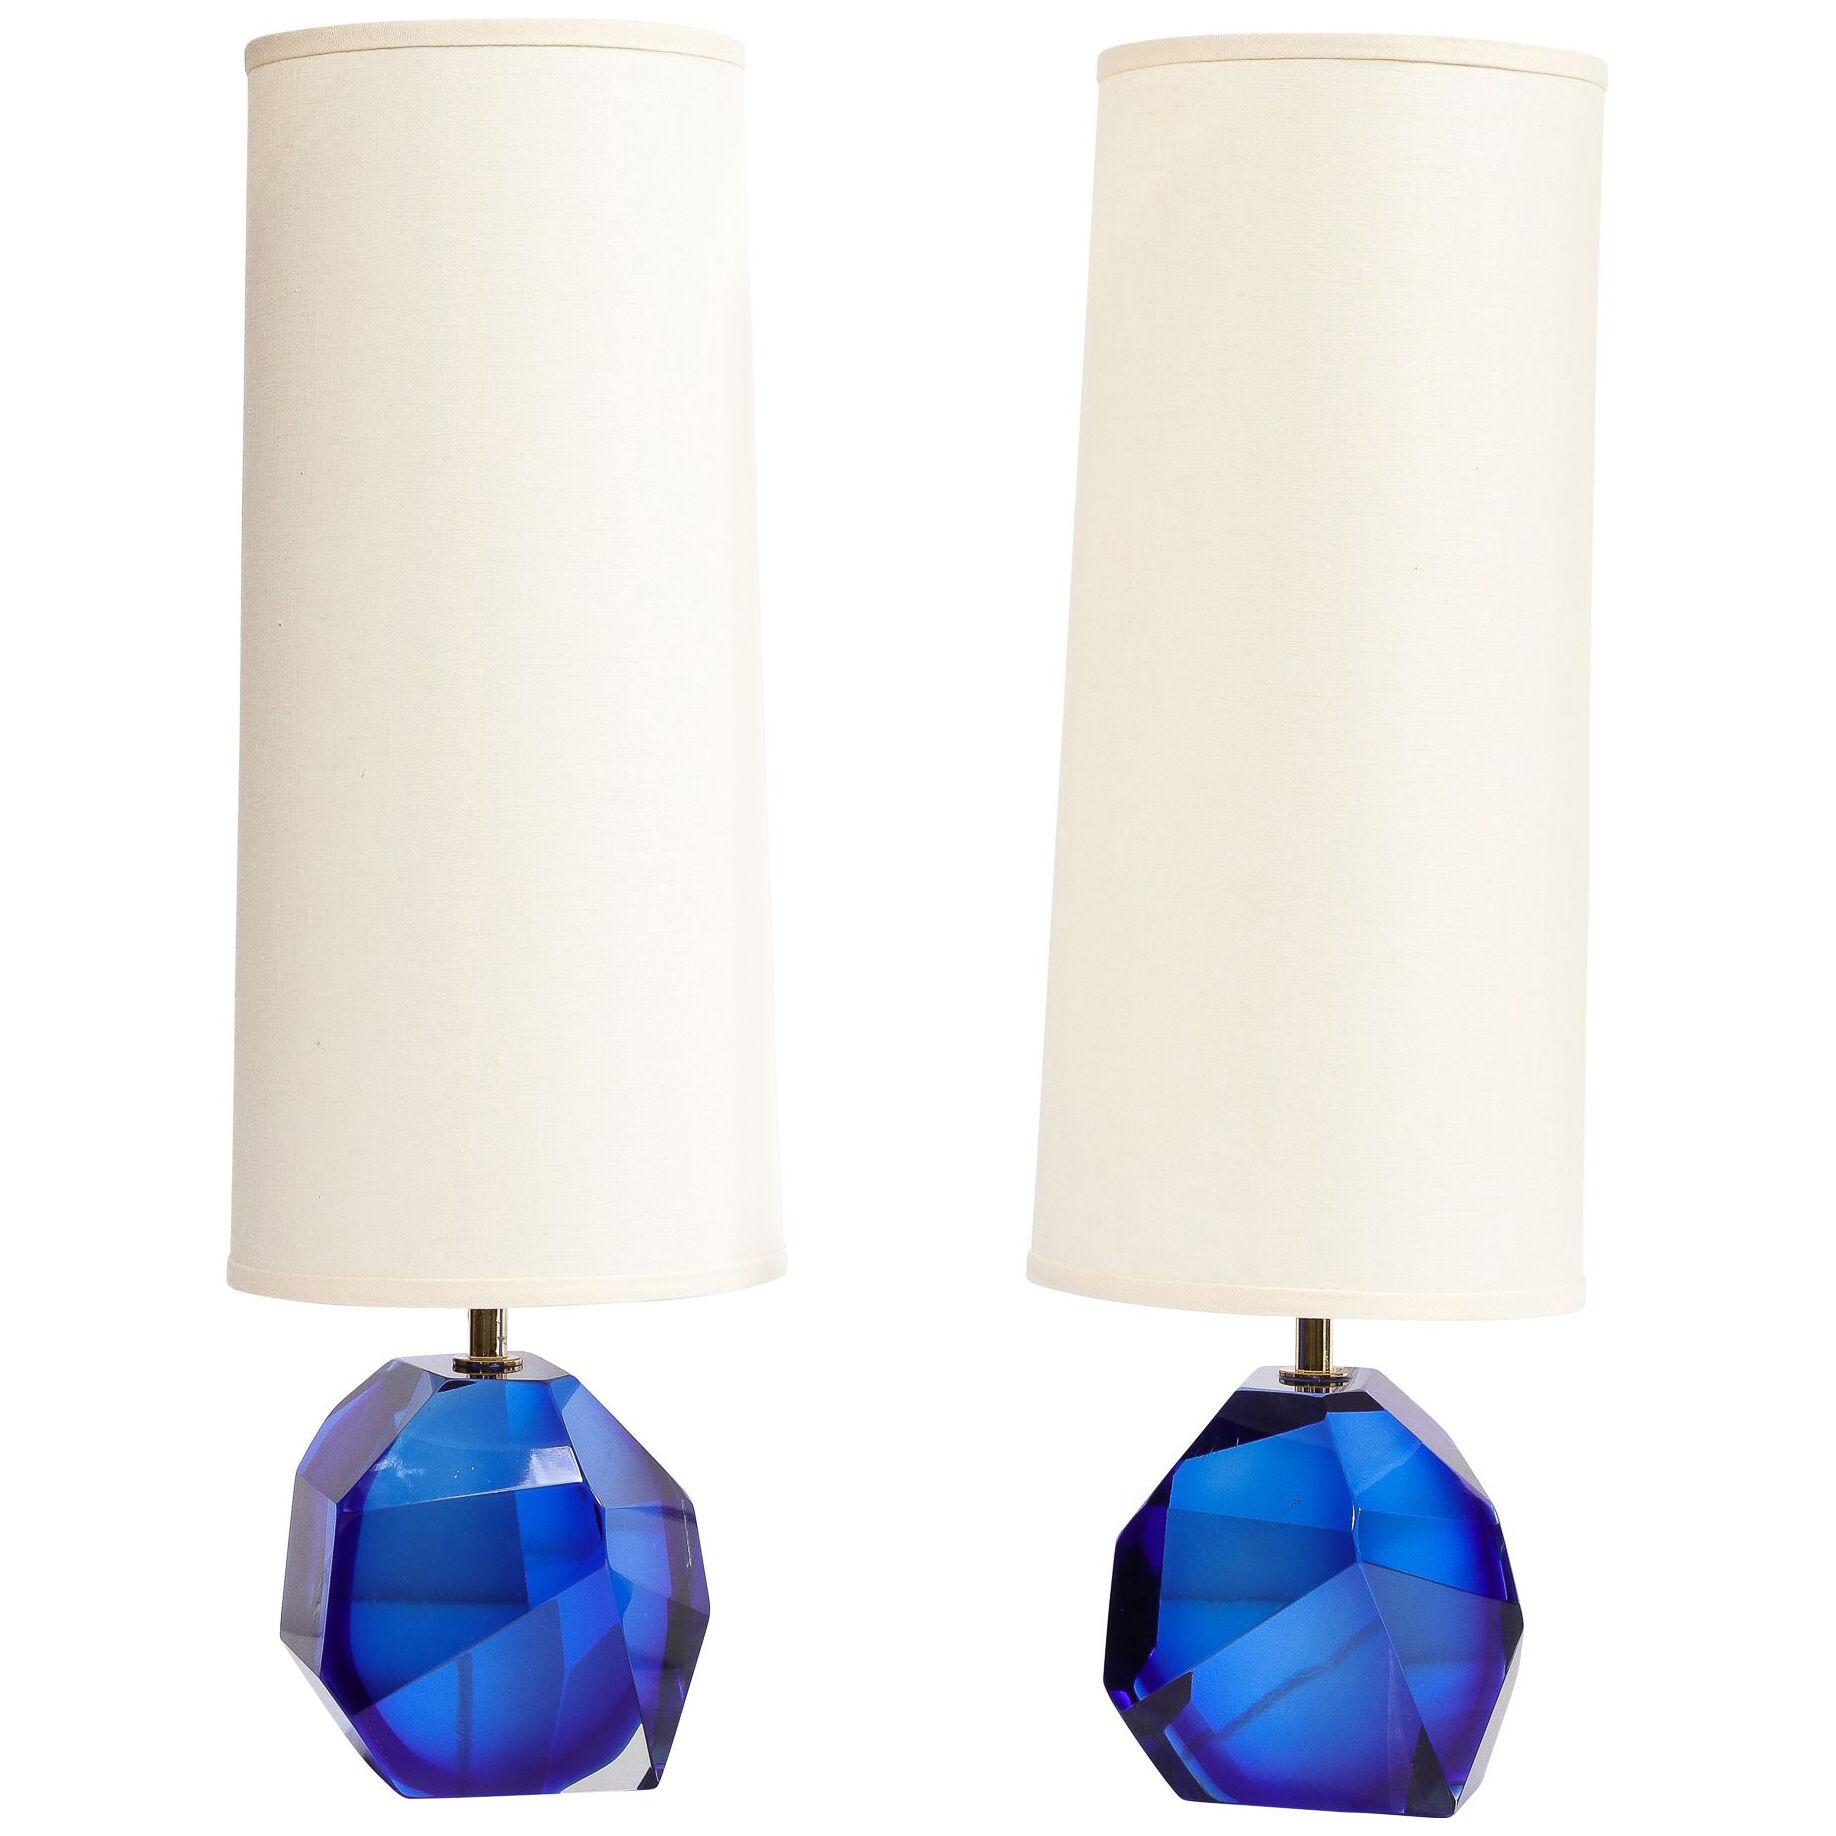 Pair of Modernist Faceted Hand-Blown Murano Glass Table Lamps in Sapphire